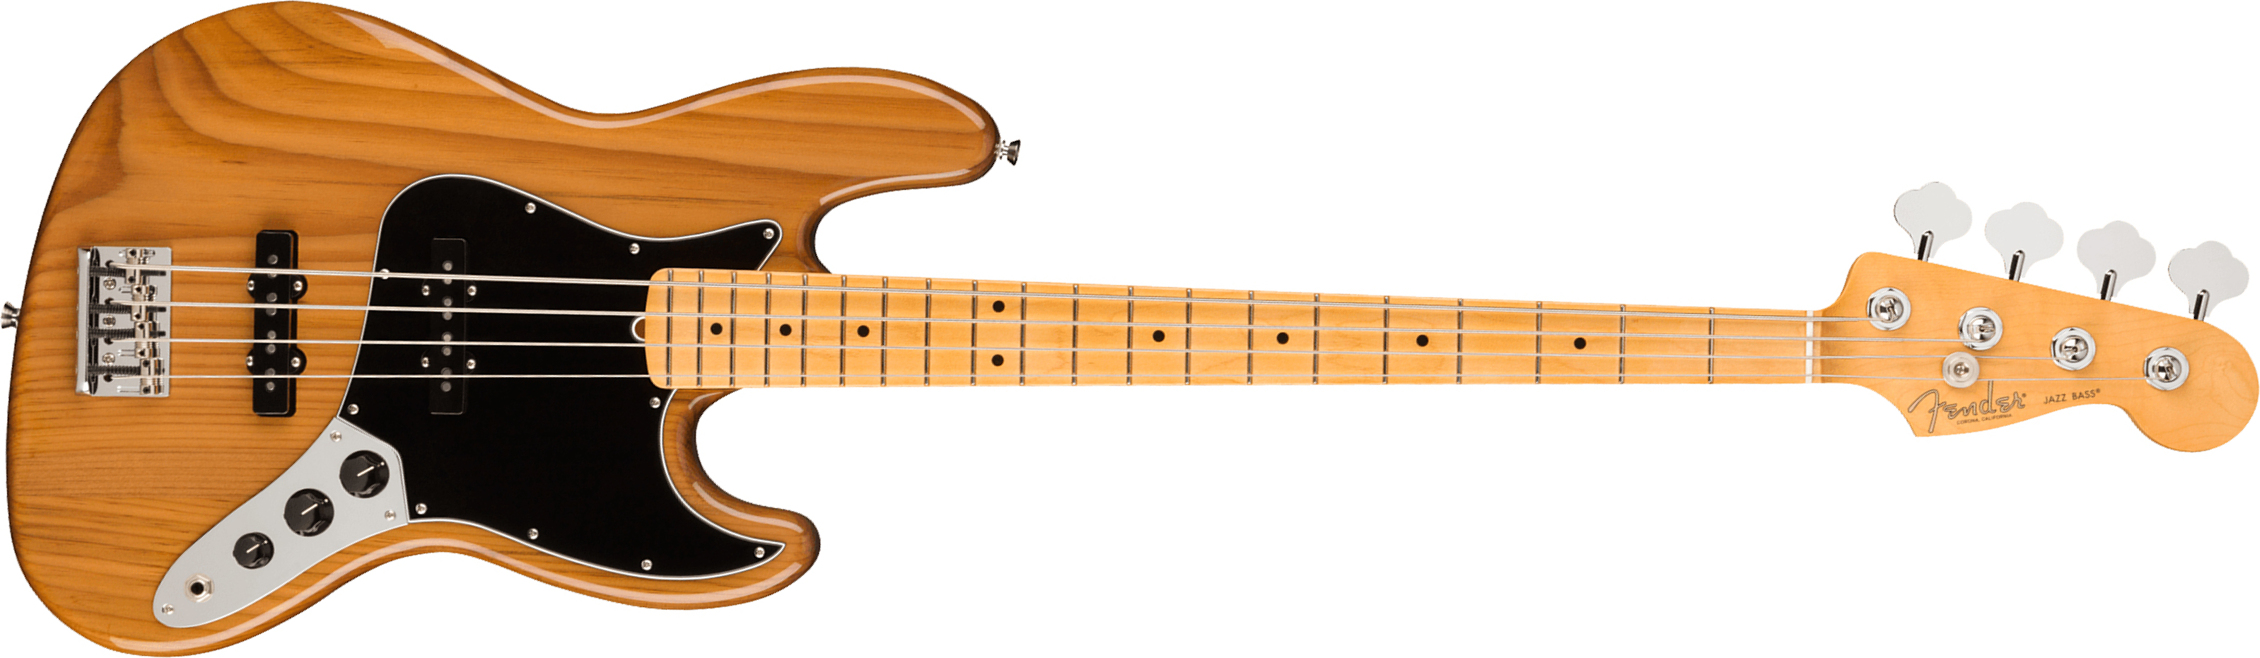 Fender Jazz Bass American Professional Ii Usa Mn - Roasted Pine - Solid body electric bass - Main picture